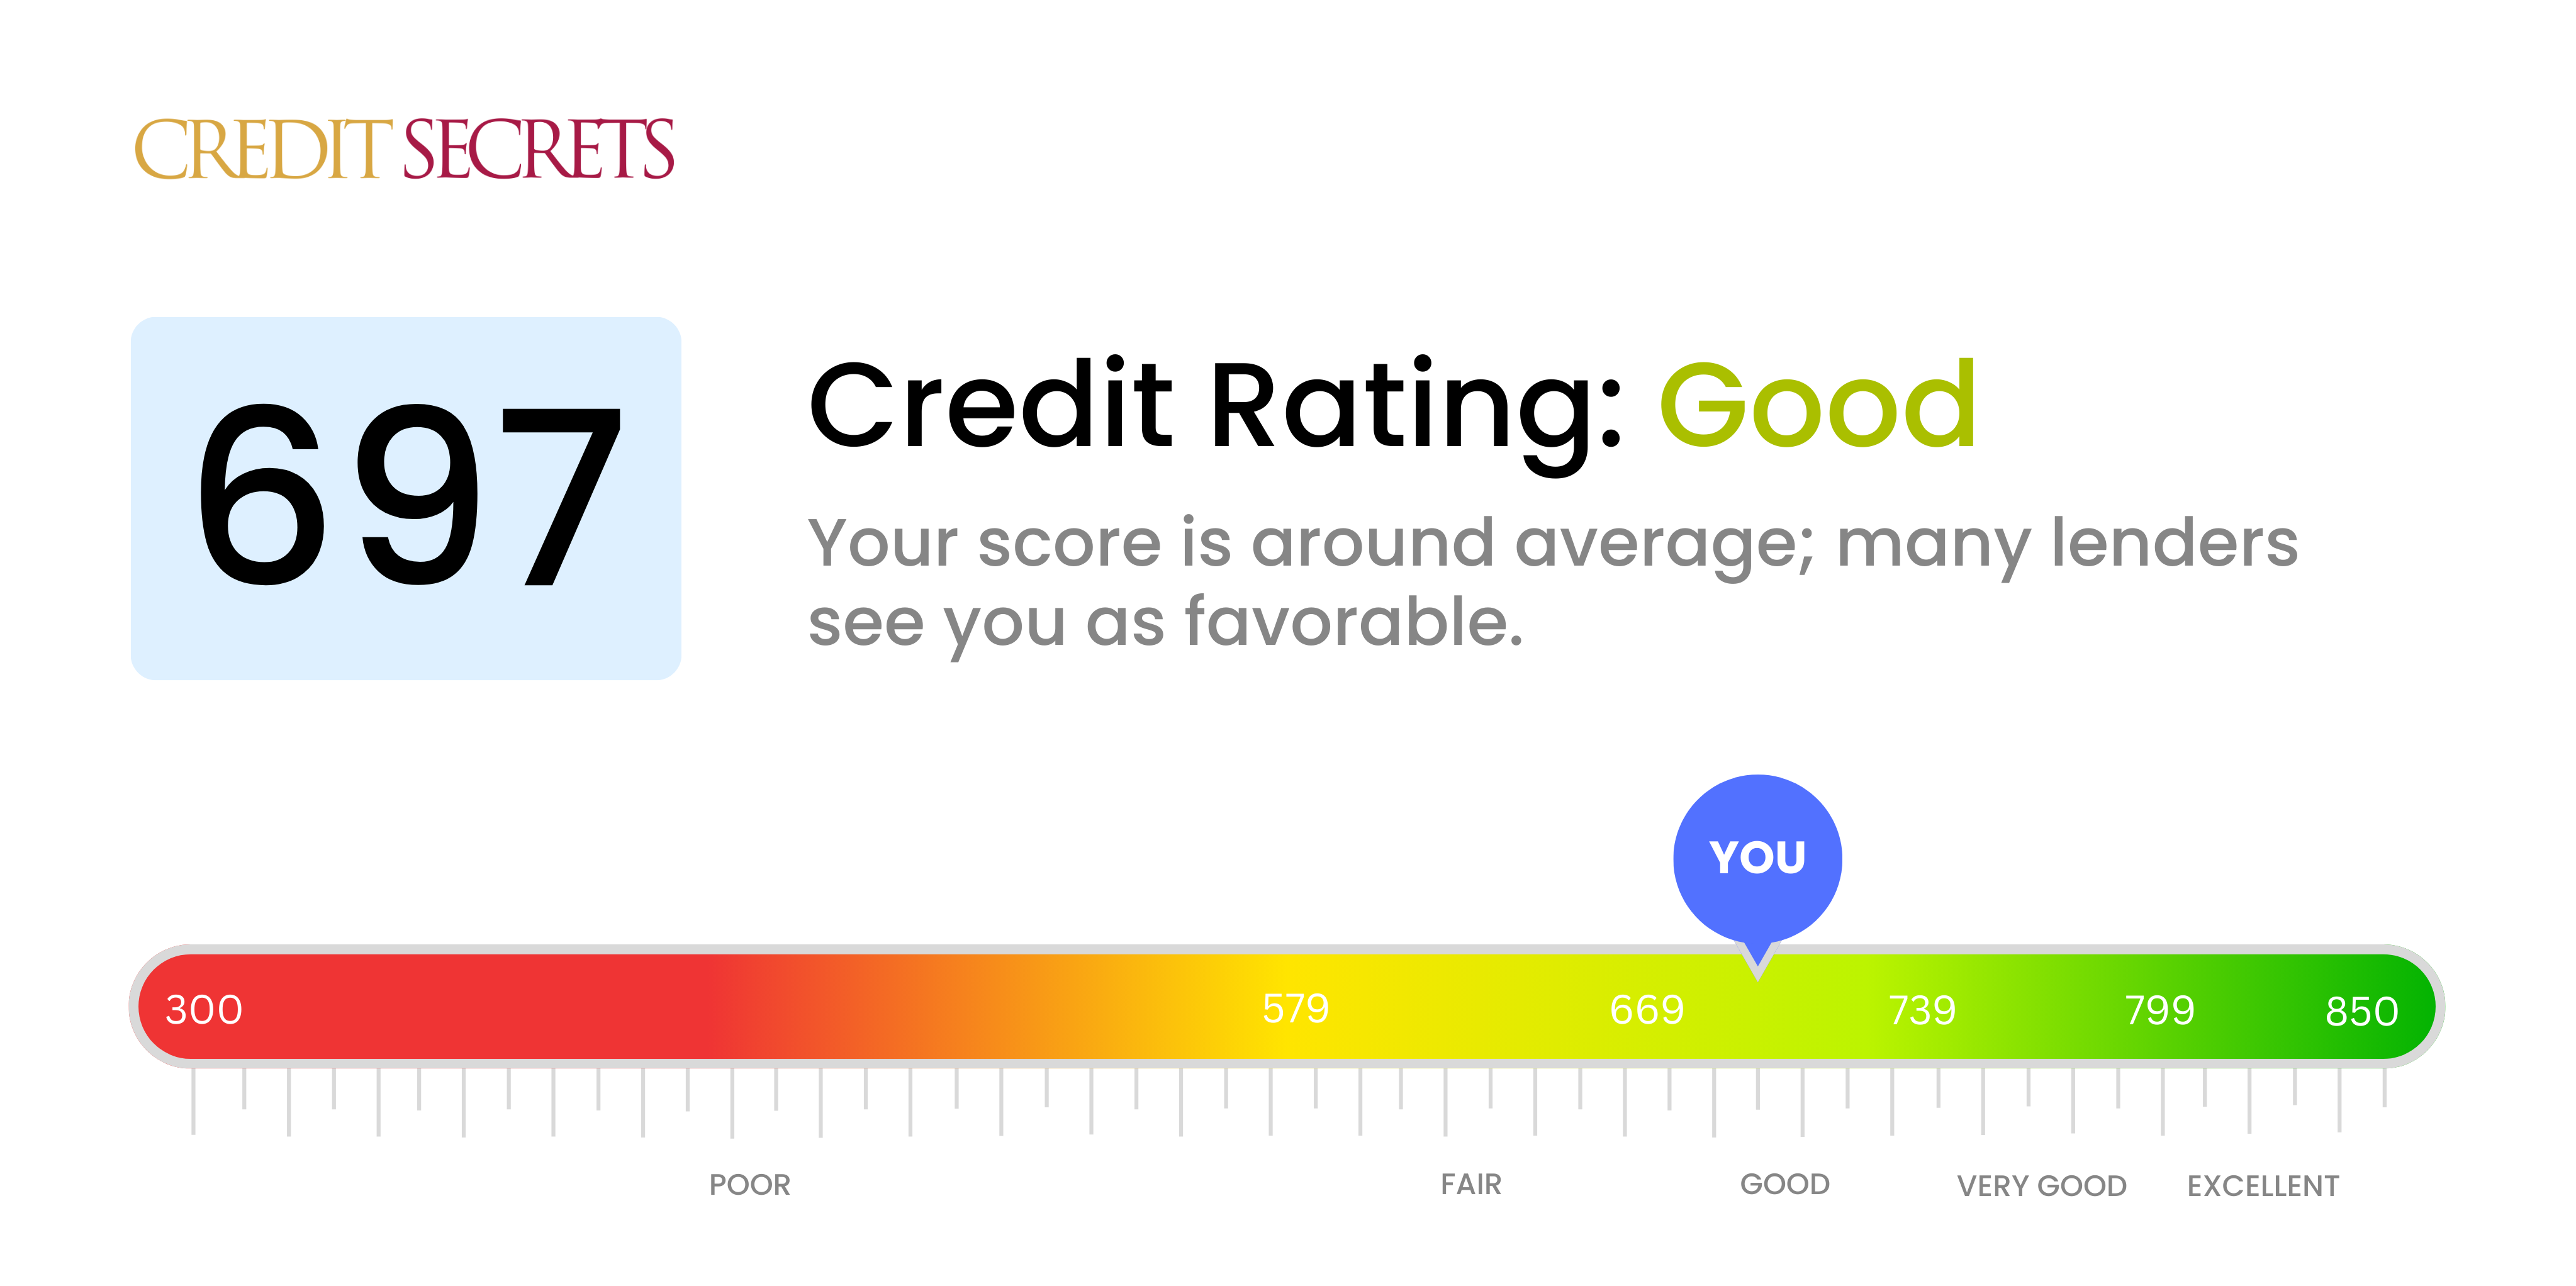 Is 697 a good credit score?